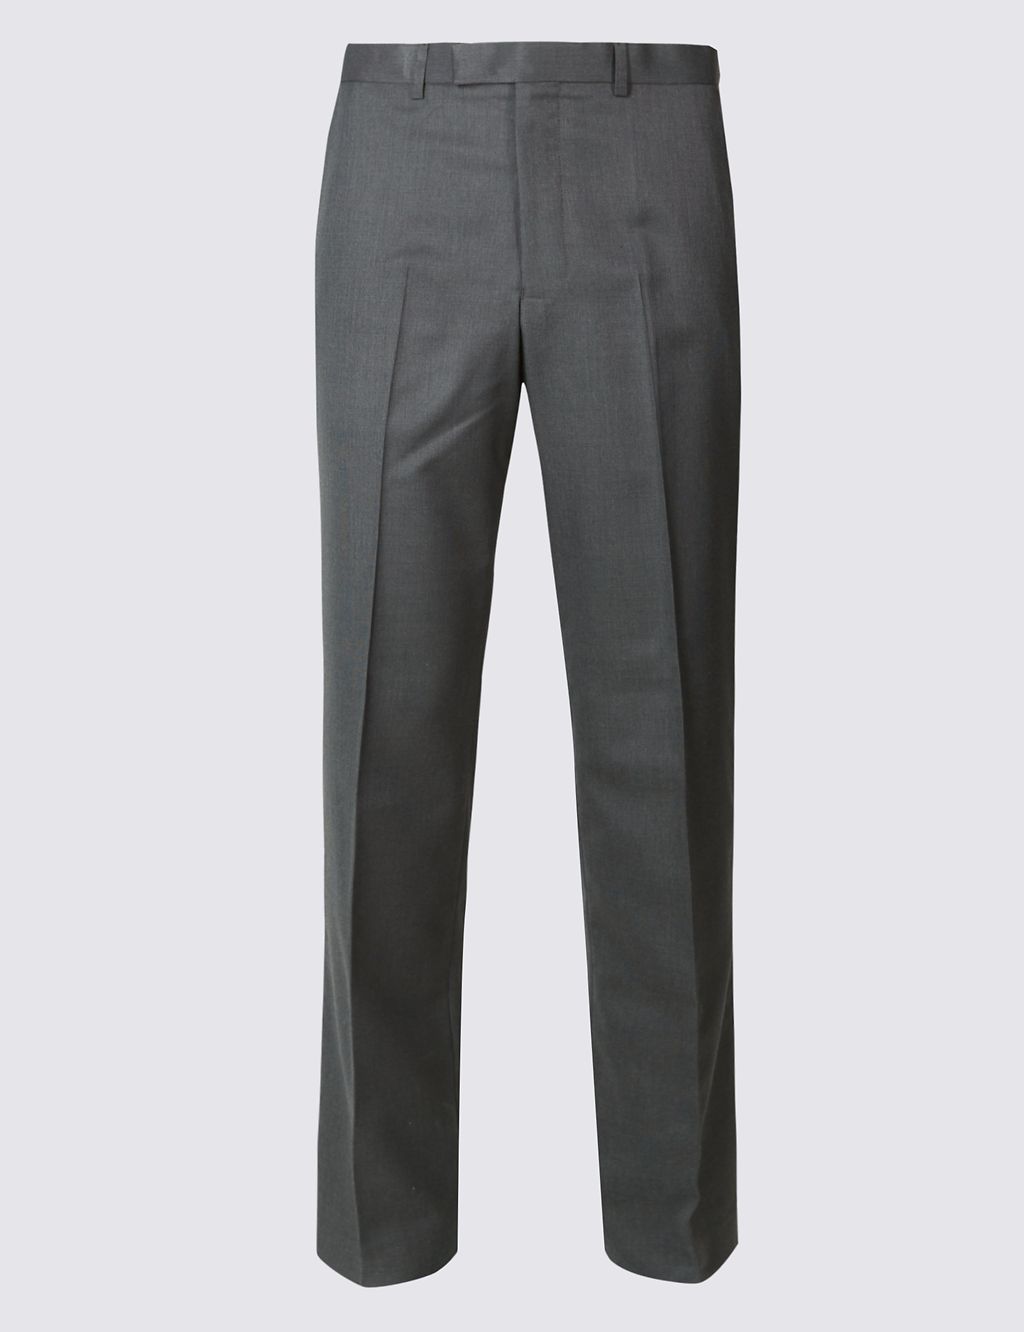 Charcoal Textured Regular Fit Trousers 1 of 6